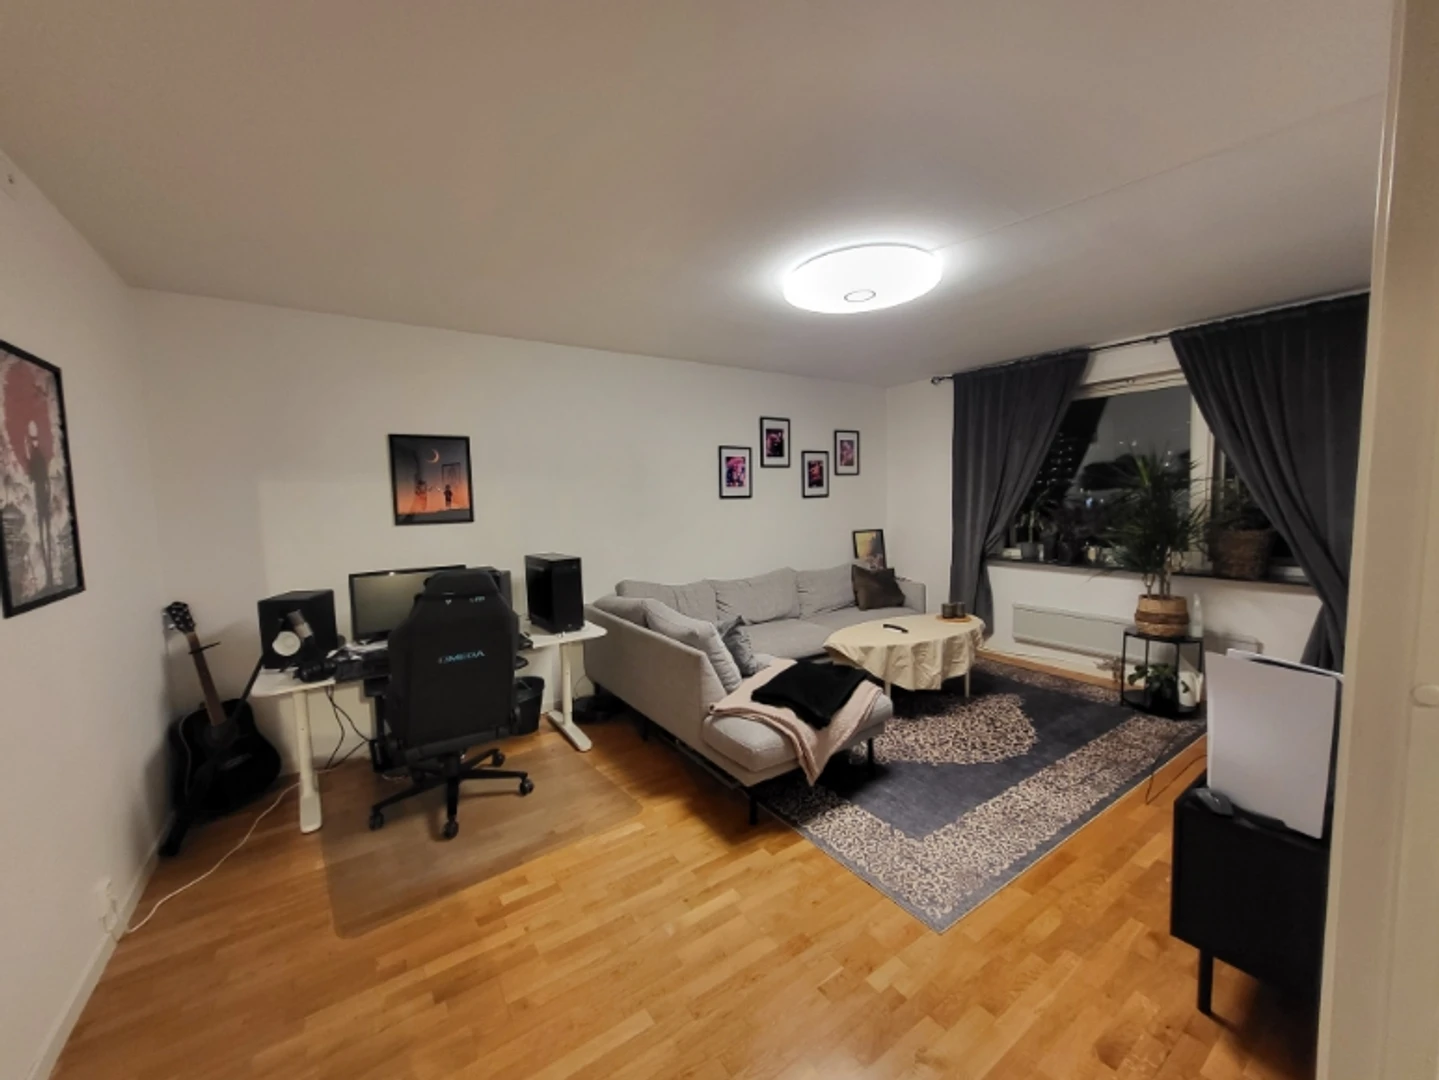 Accommodation in the centre of Gothenburg